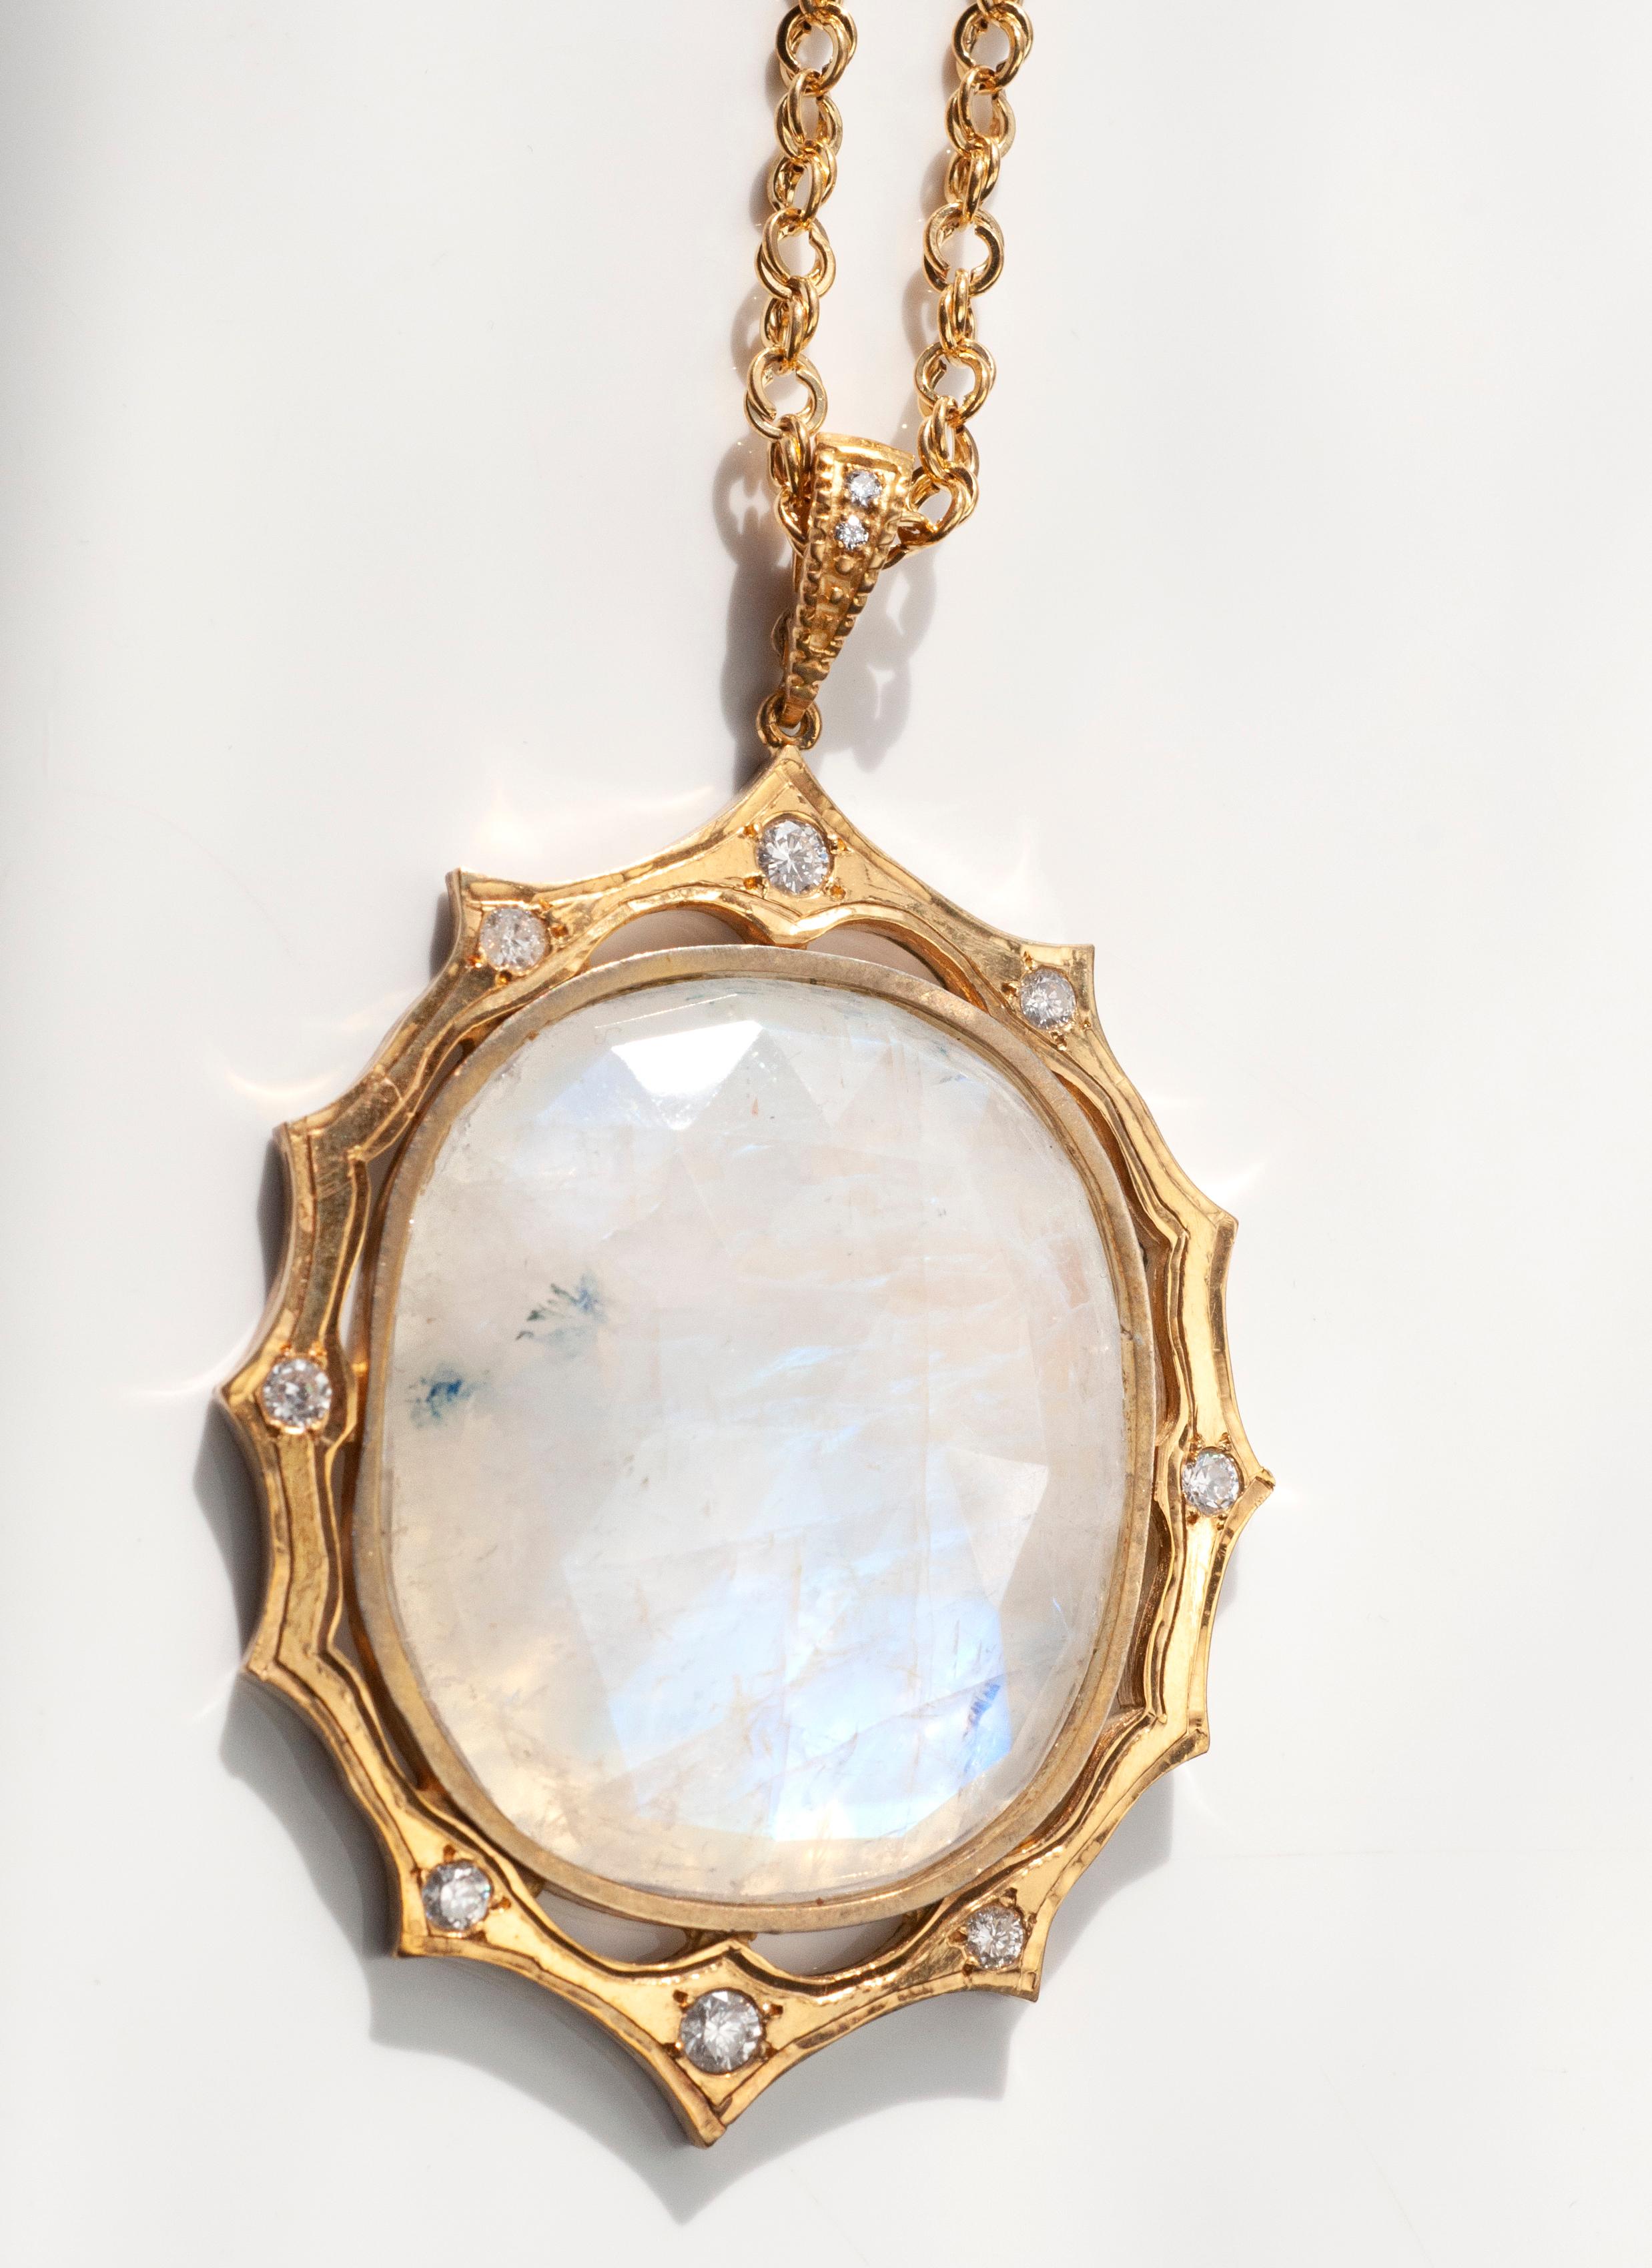 18 Karat Yellow Gold Pendant with Faceted Moonstone cabuchon approx 65.94cts and pave white brilliant diamonds 0.94cts on 20 inch 14K yellow gold chain. 
This statement necklace is great on a white summer dress or wear it for a evening out with our